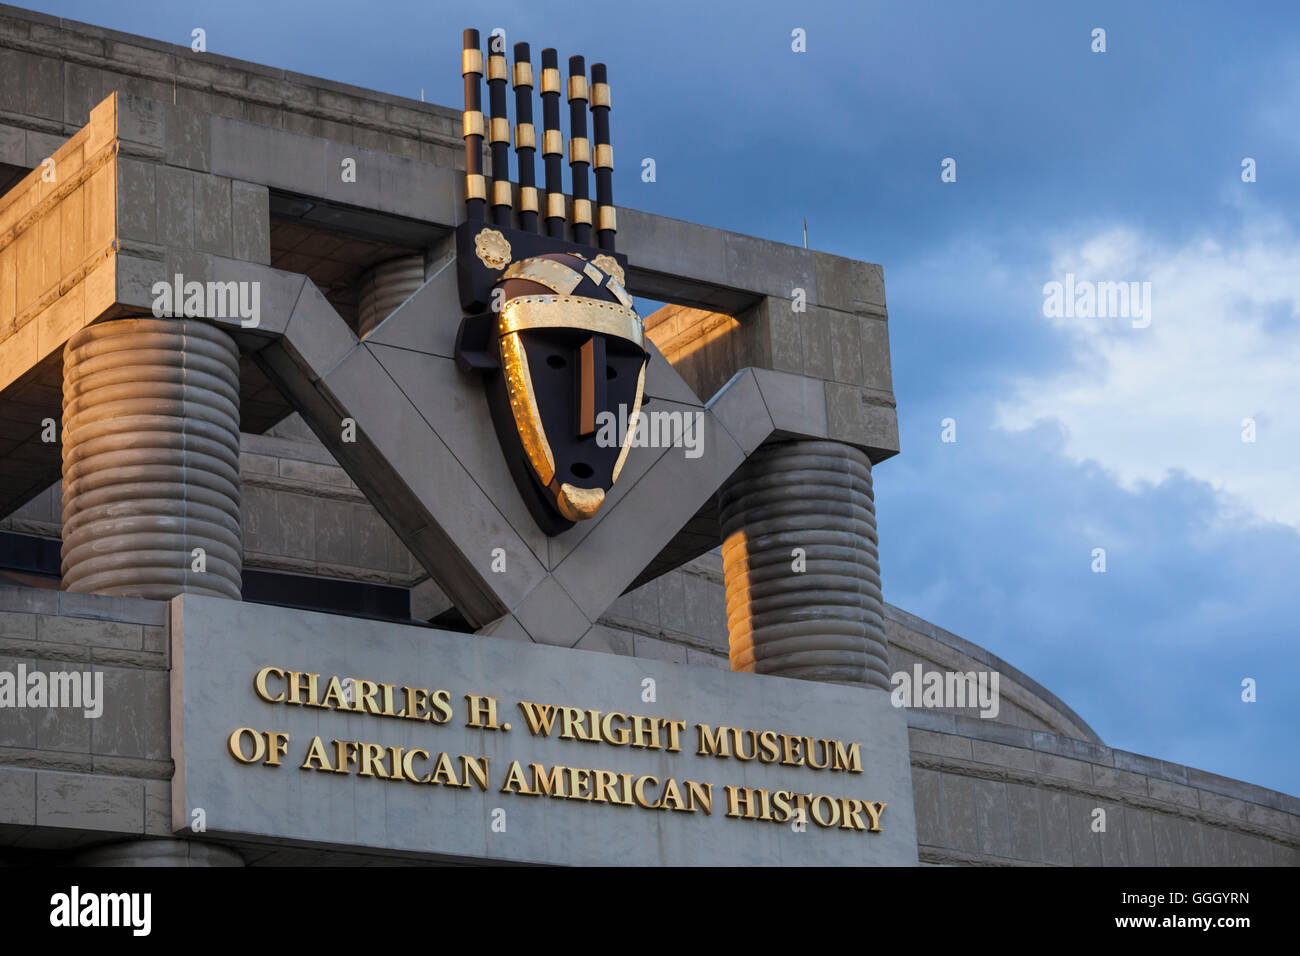 Detroit, Michigan - il Charles H. Wright Museum of African American History. Foto Stock